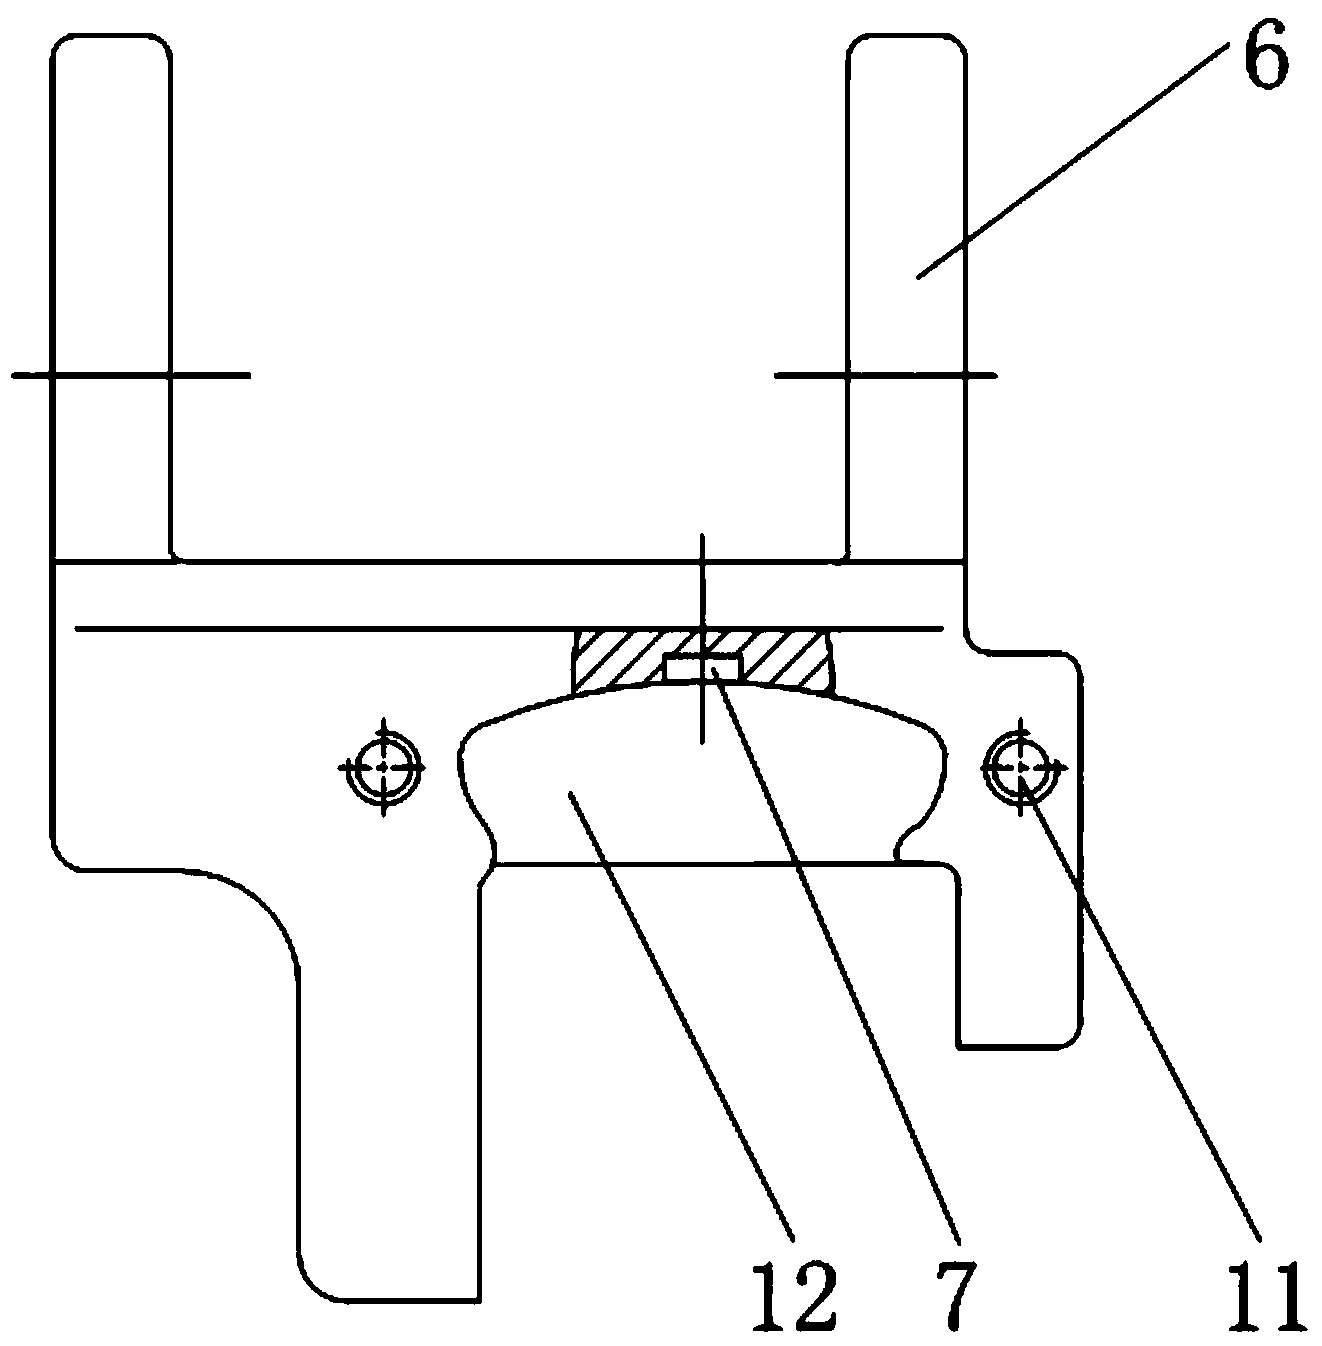 Non-guide foot of coal cutter